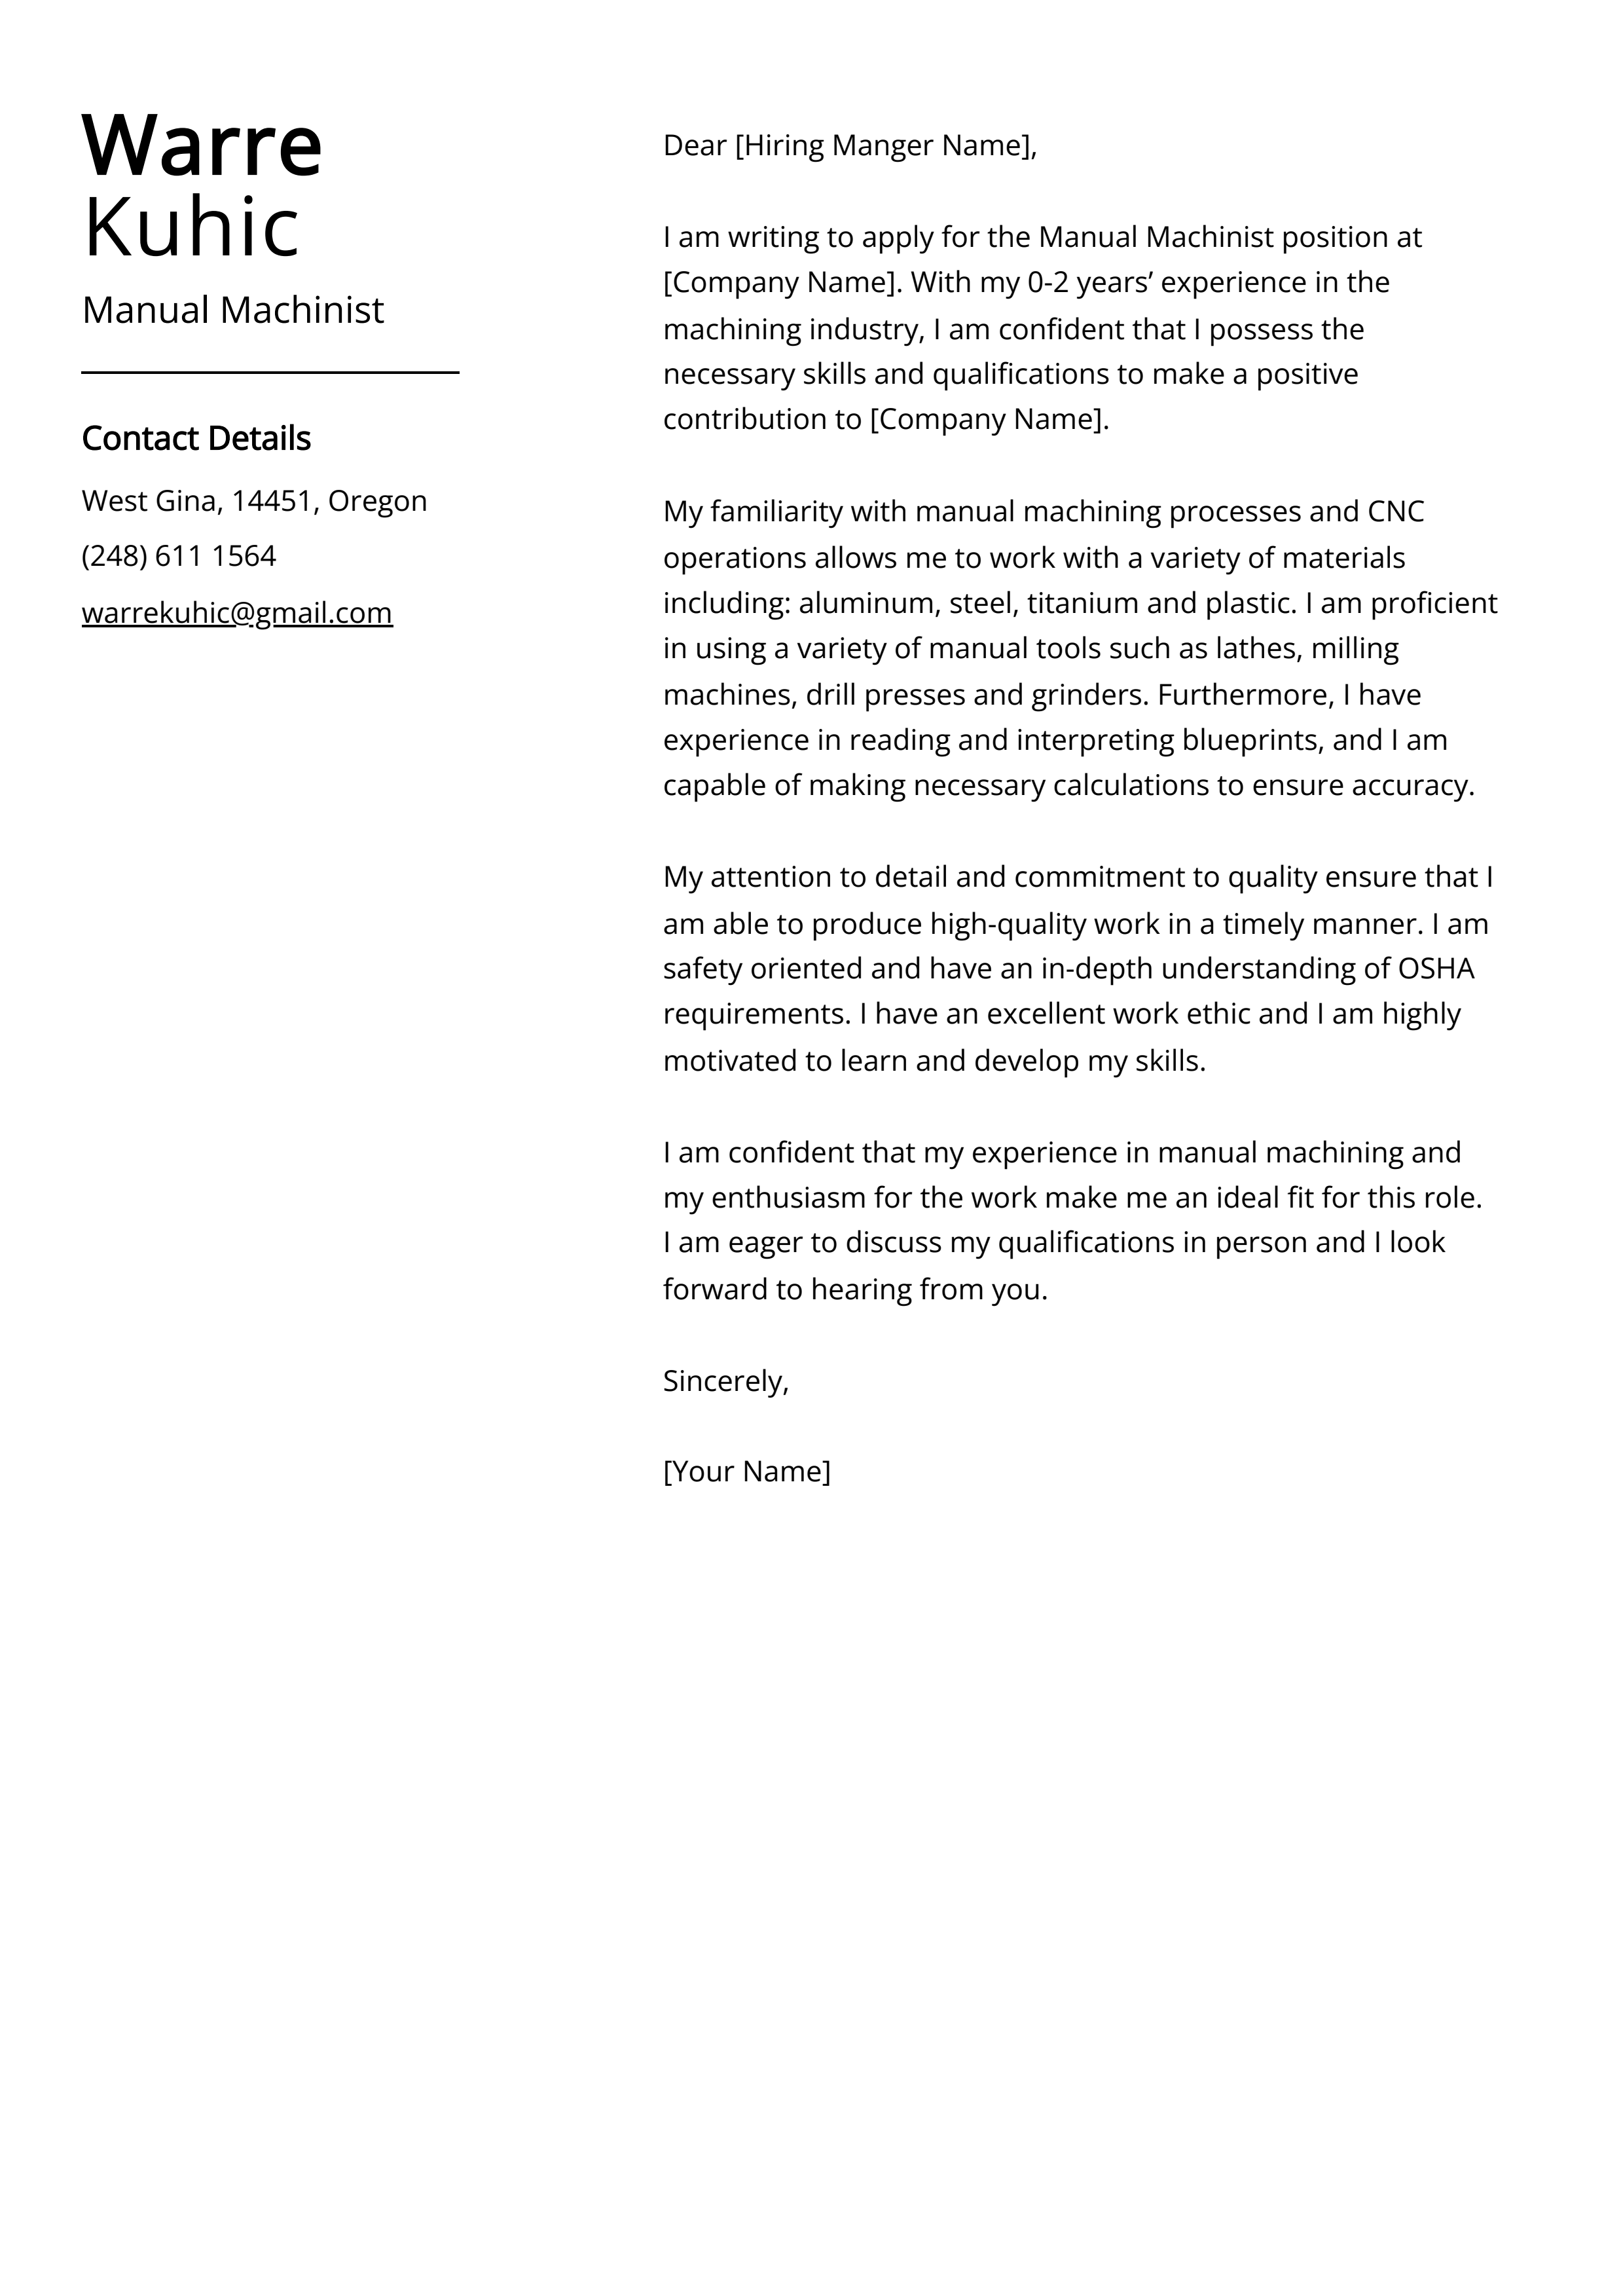 Manual Machinist Cover Letter Example